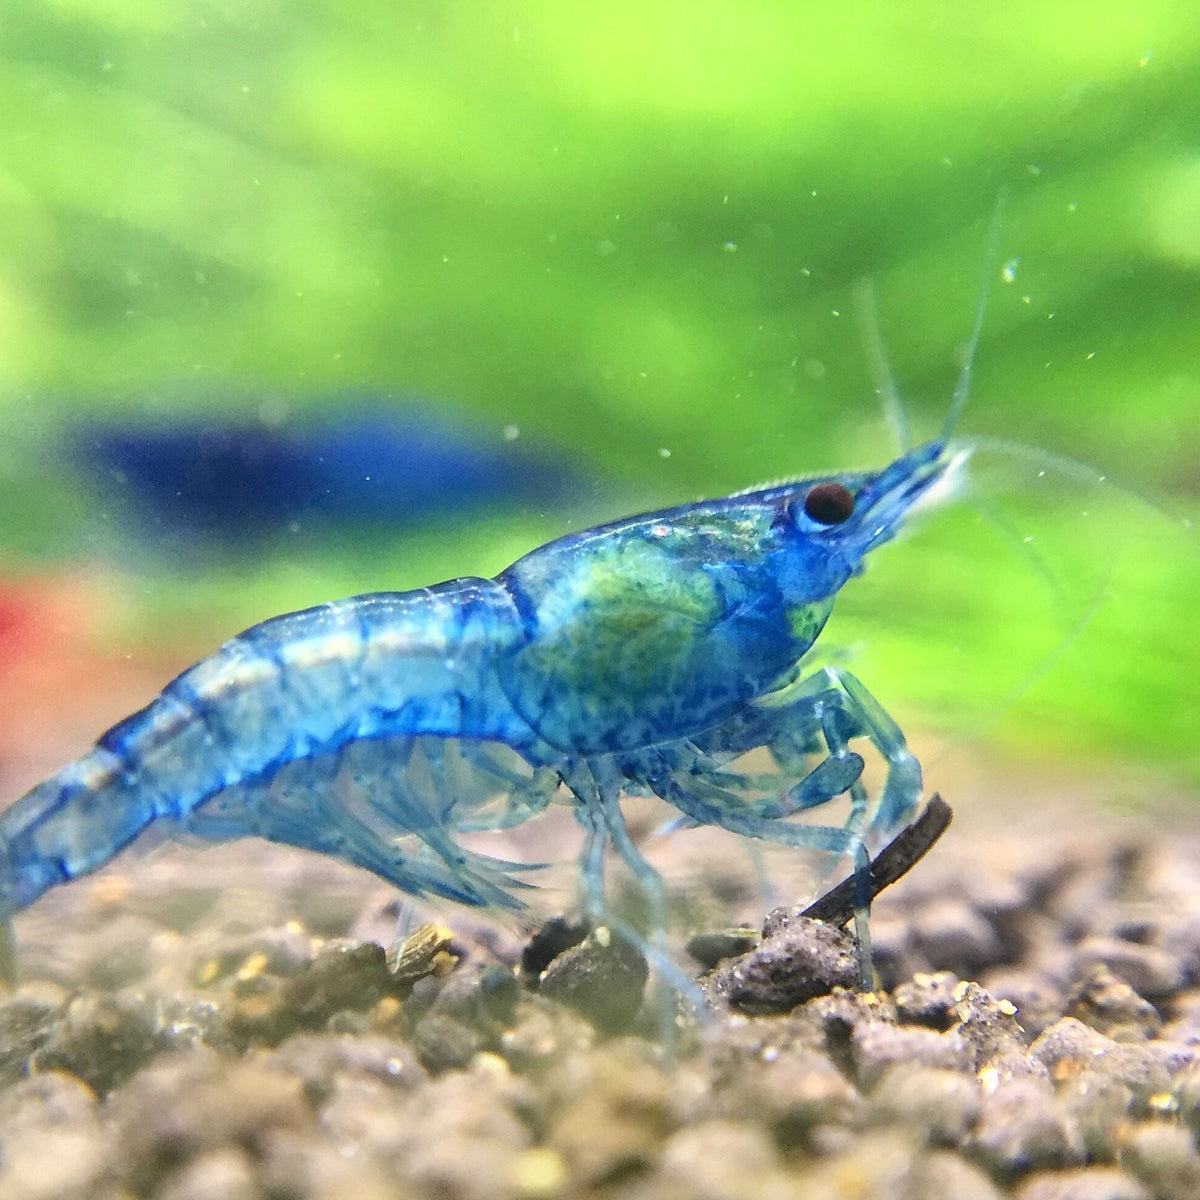 Shrimp Size Guide: Everything You Need to Know